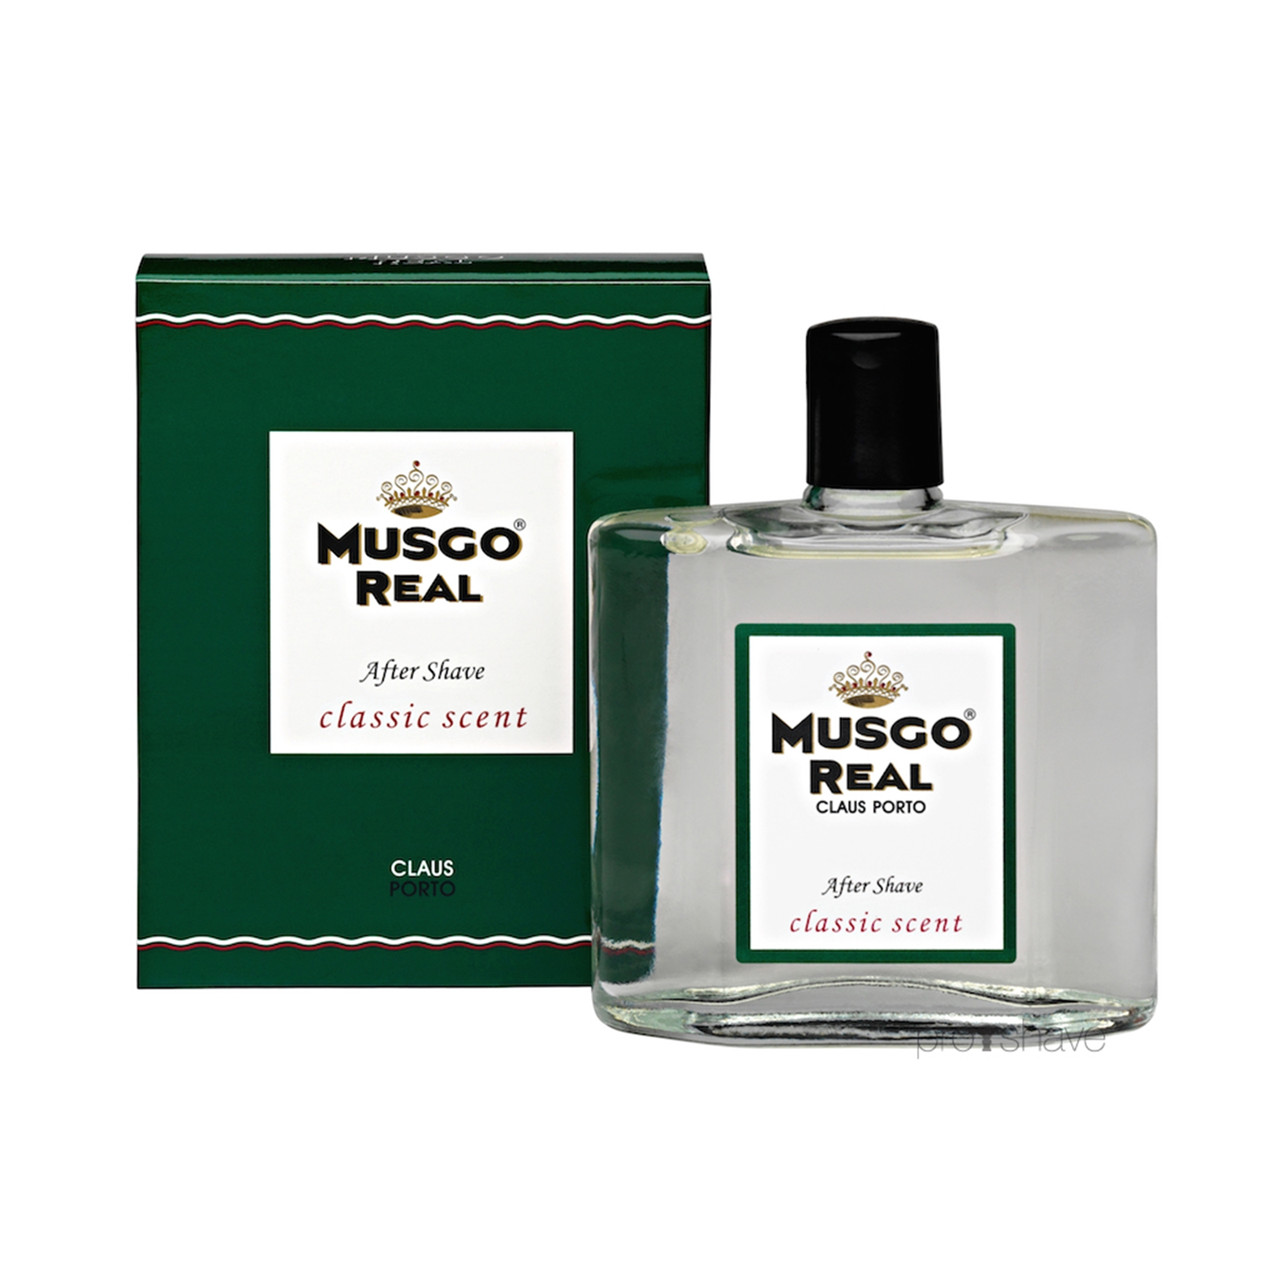 Musgo Real Aftershave Cologne Classic, 100 ml.